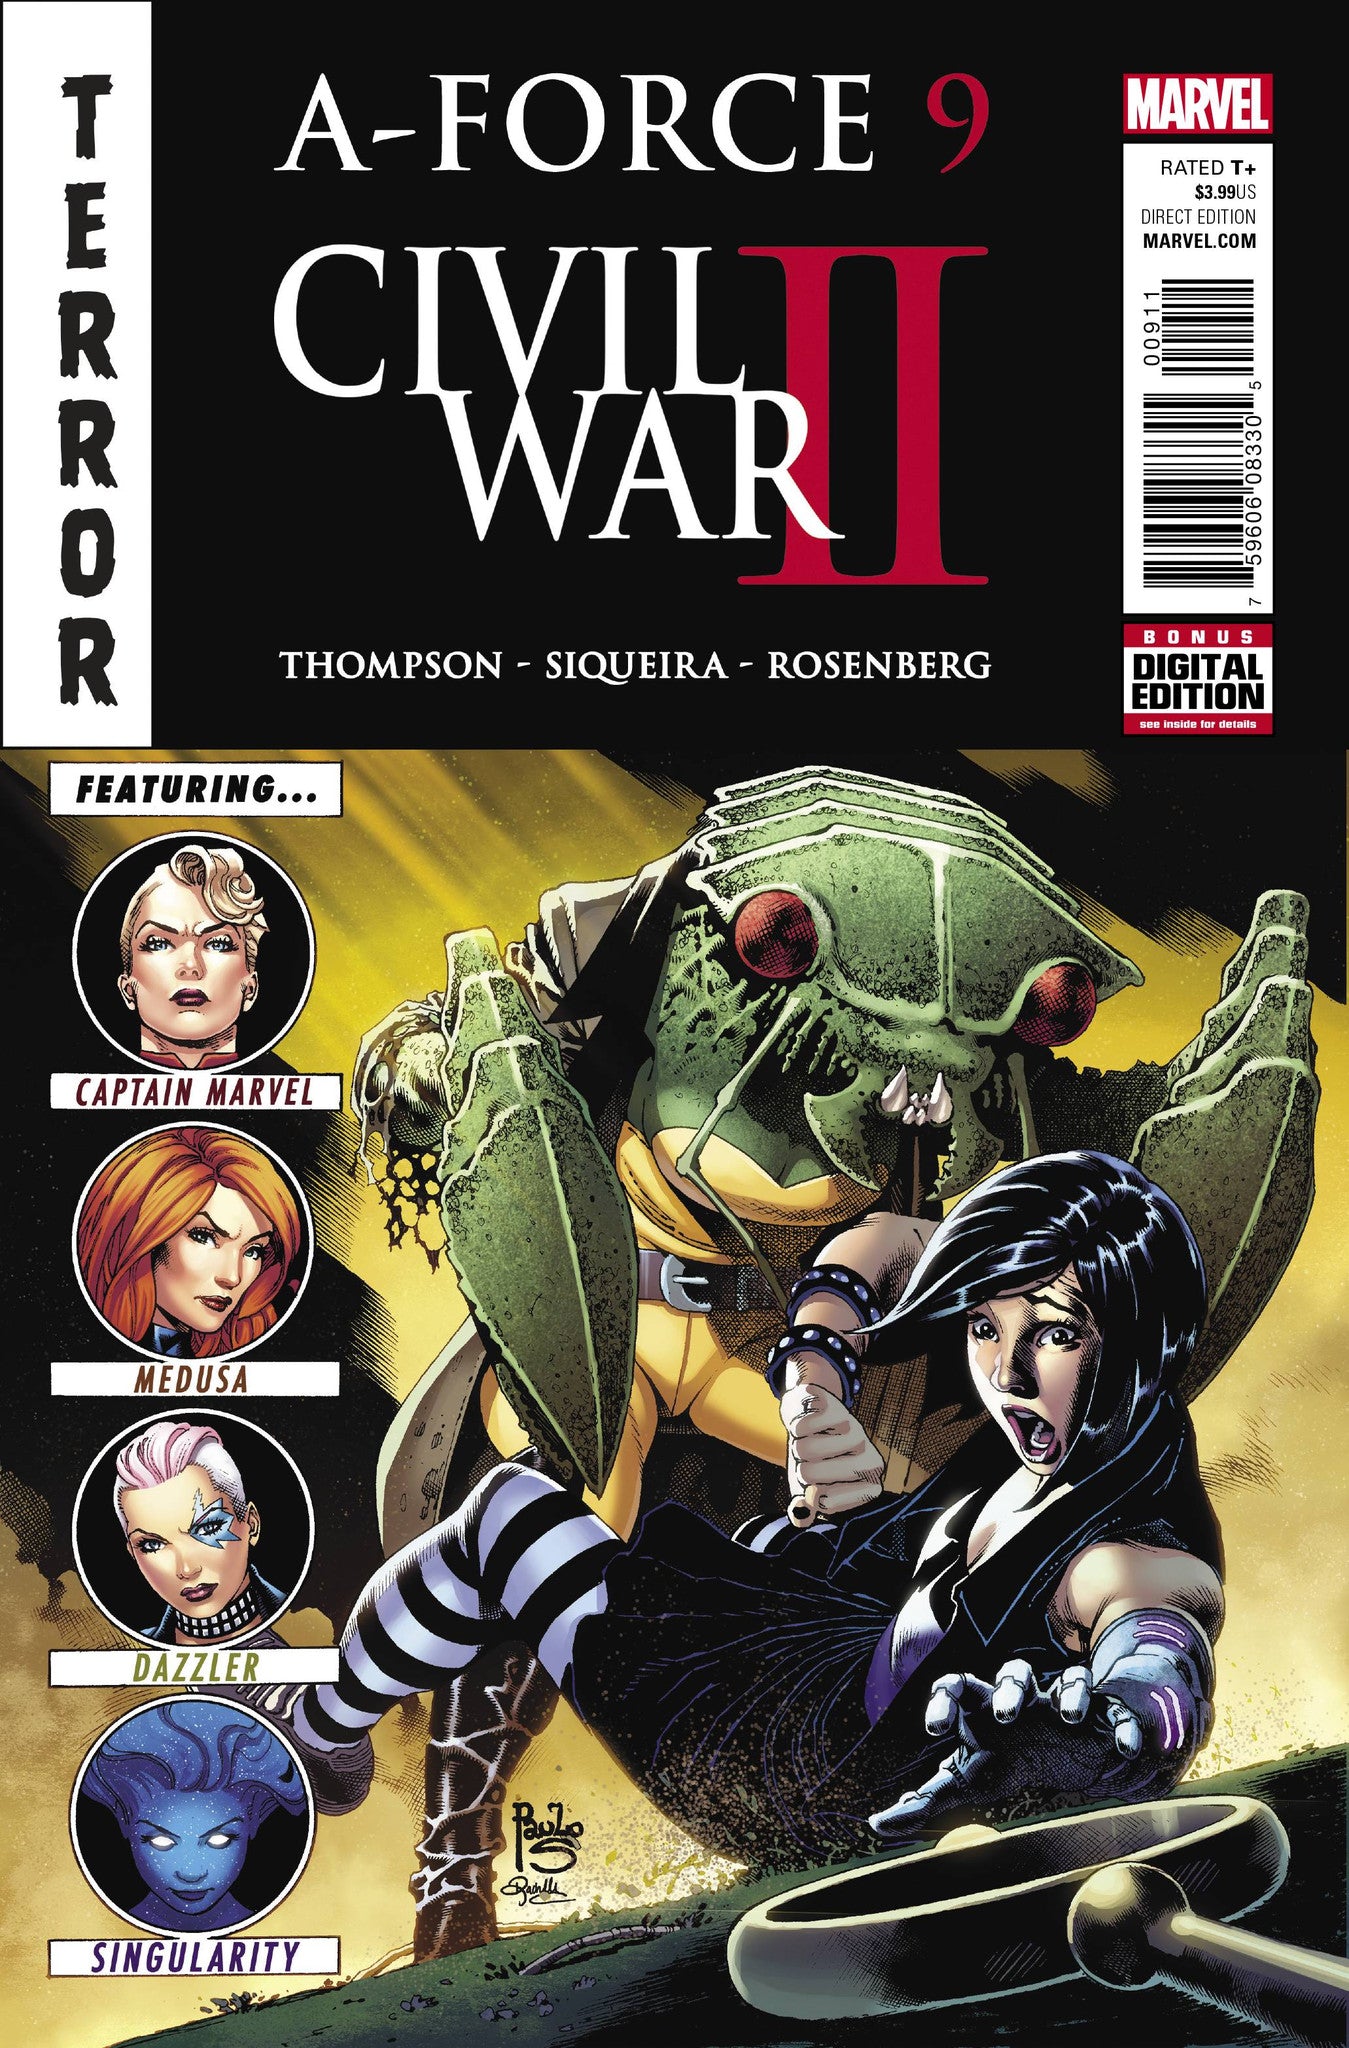 A-FORCE #9 CW2 COVER